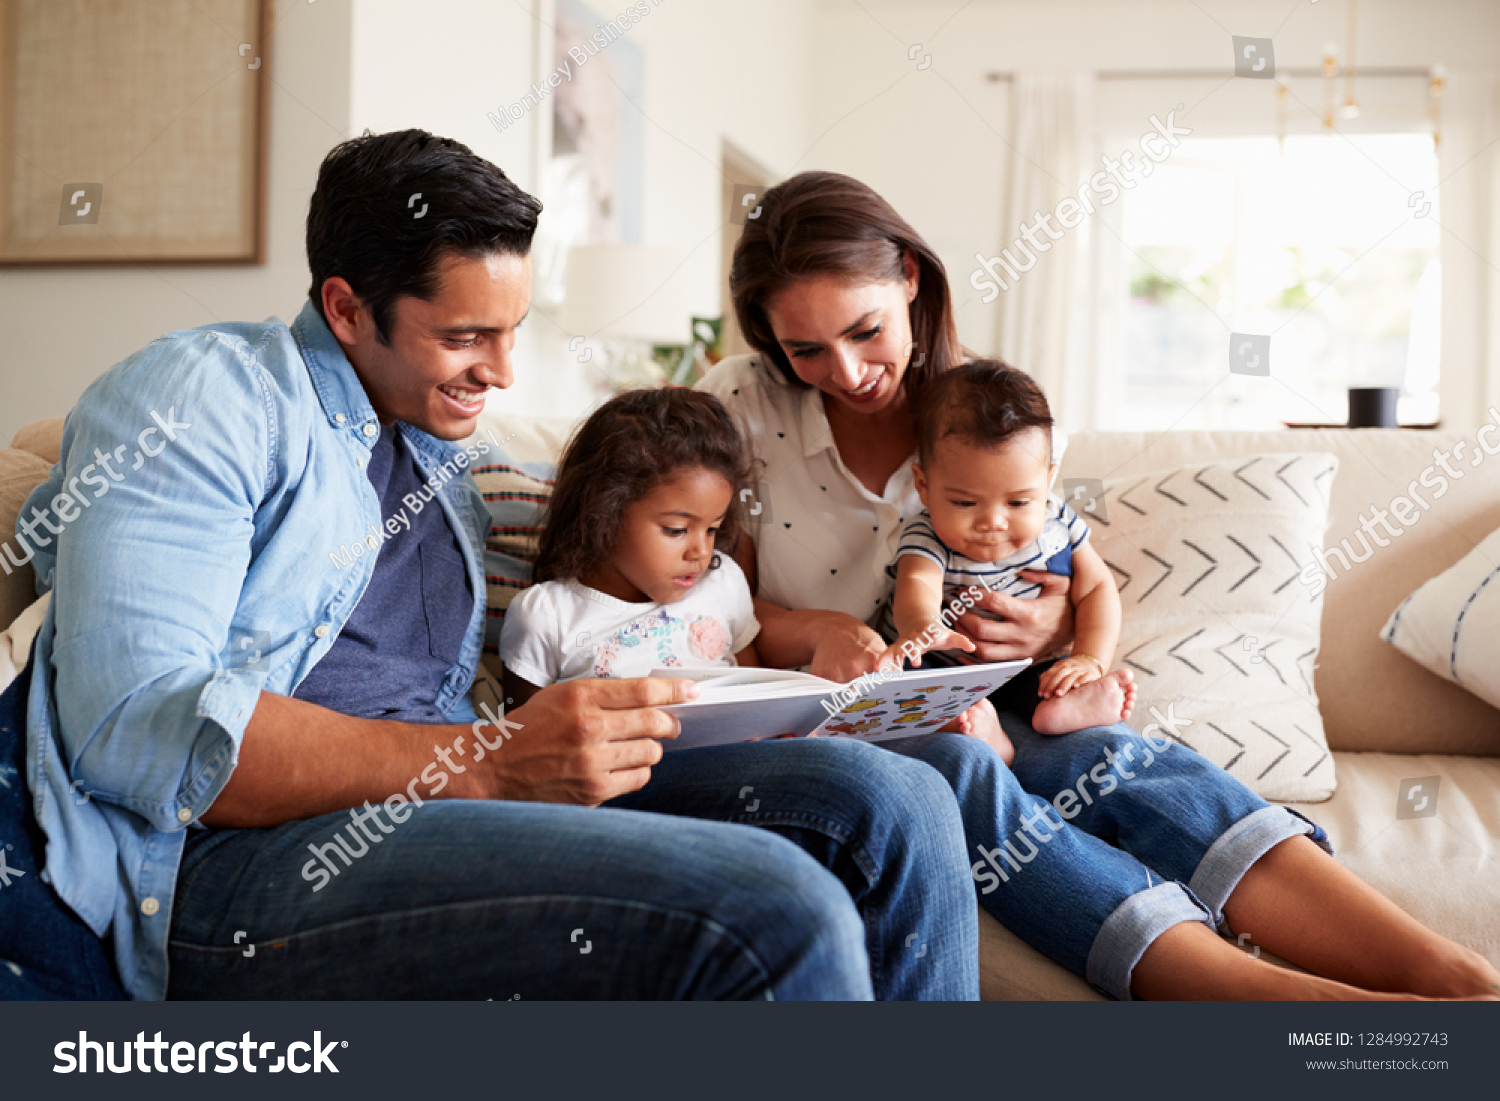 Young Hispanic family of four sitting on the sofa reading a book together in their living room #1284992743